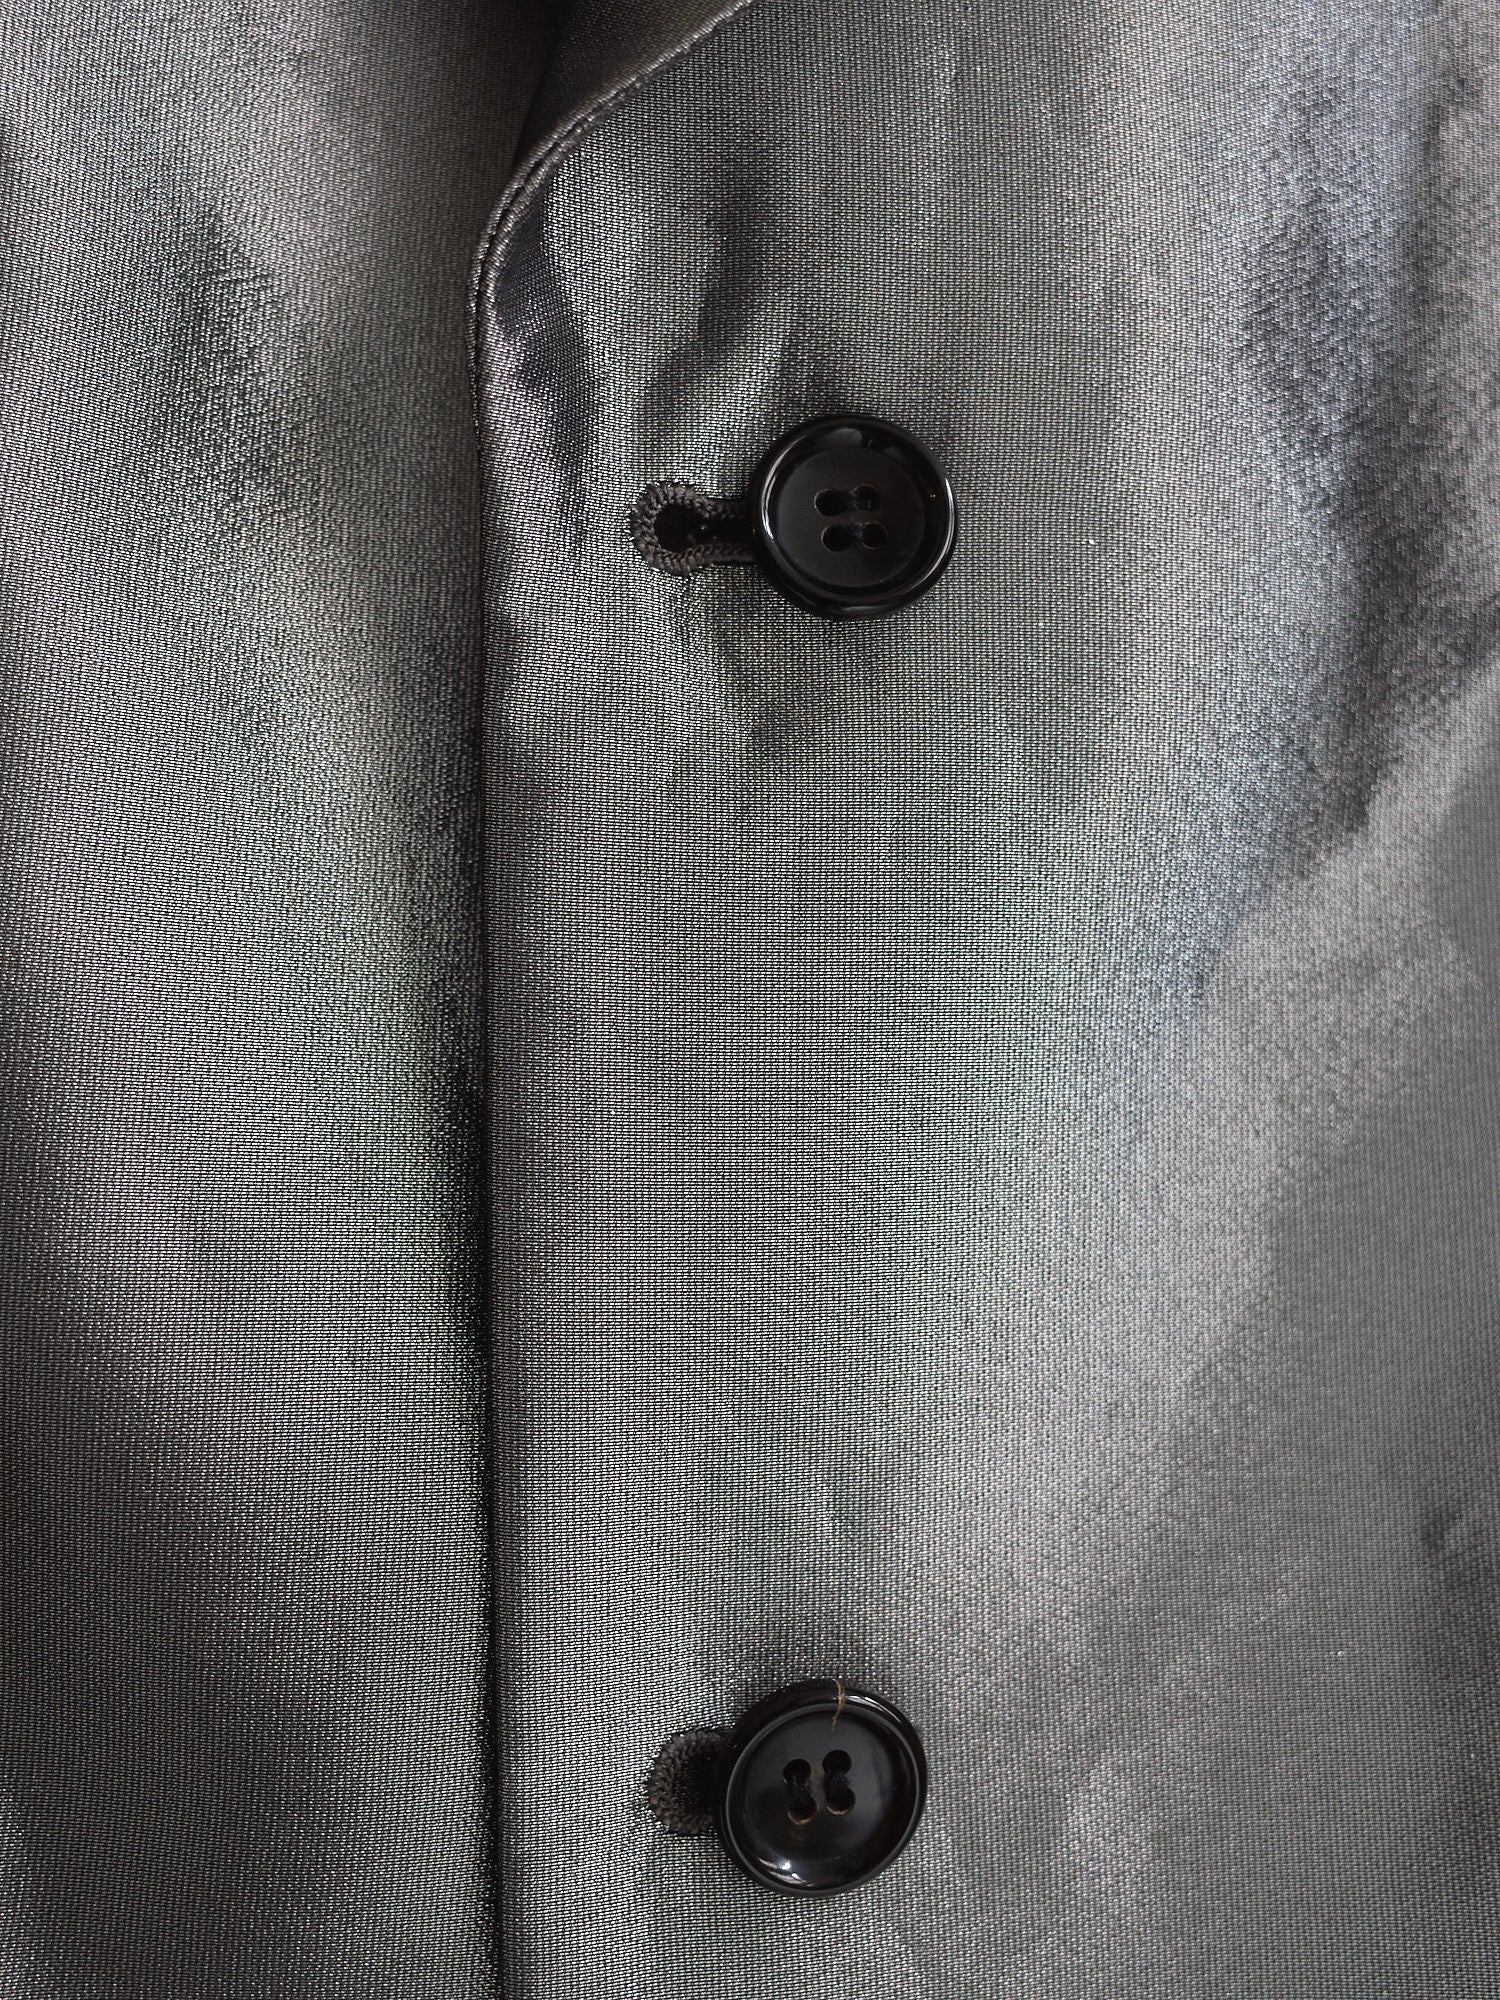 Tricot Comme des Garcons 1995 silver polyester 2 button blazer - womens M S